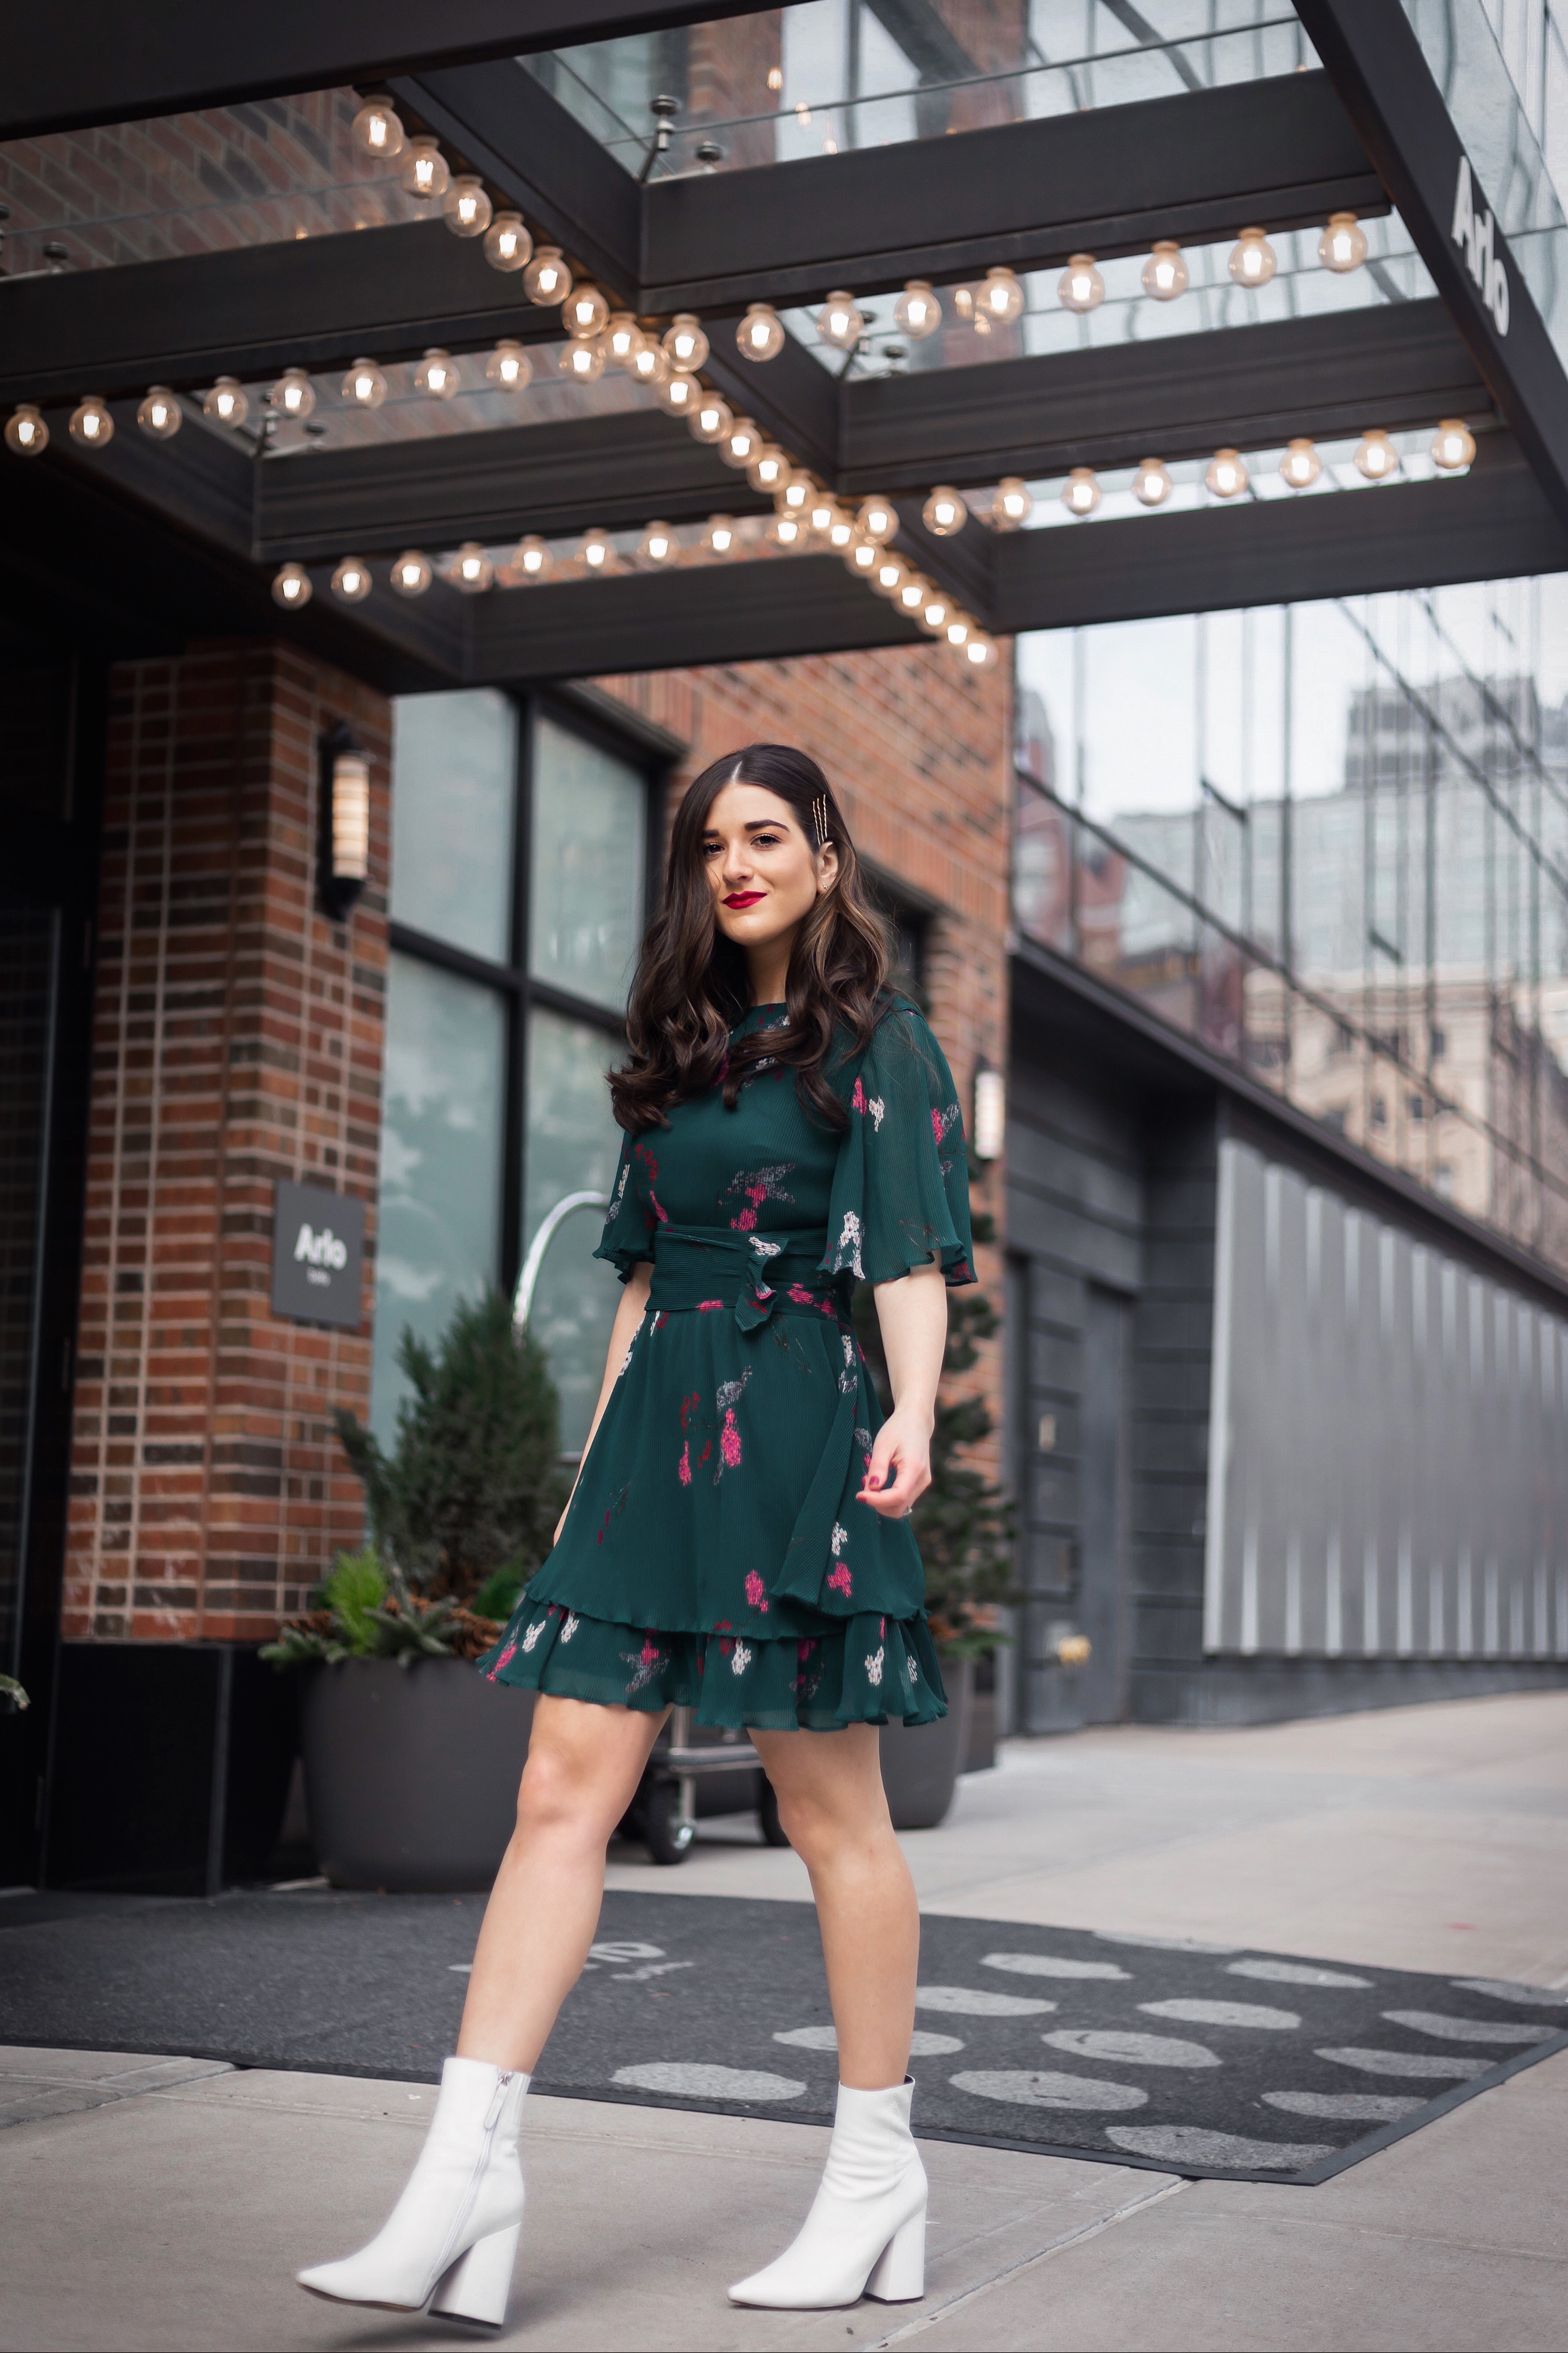 10 NYC Experiences Everyone Should Have Green Floral Dress White Booties Esther Santer Fashion Blog NYC Street Style Blogger Outfit OOTD Trendy Shopping Girl What How To  Wear Bobby Pins Hairstyle Fall Look Butterfly Sleeves Keepsake Label Arlo Soho.JPG